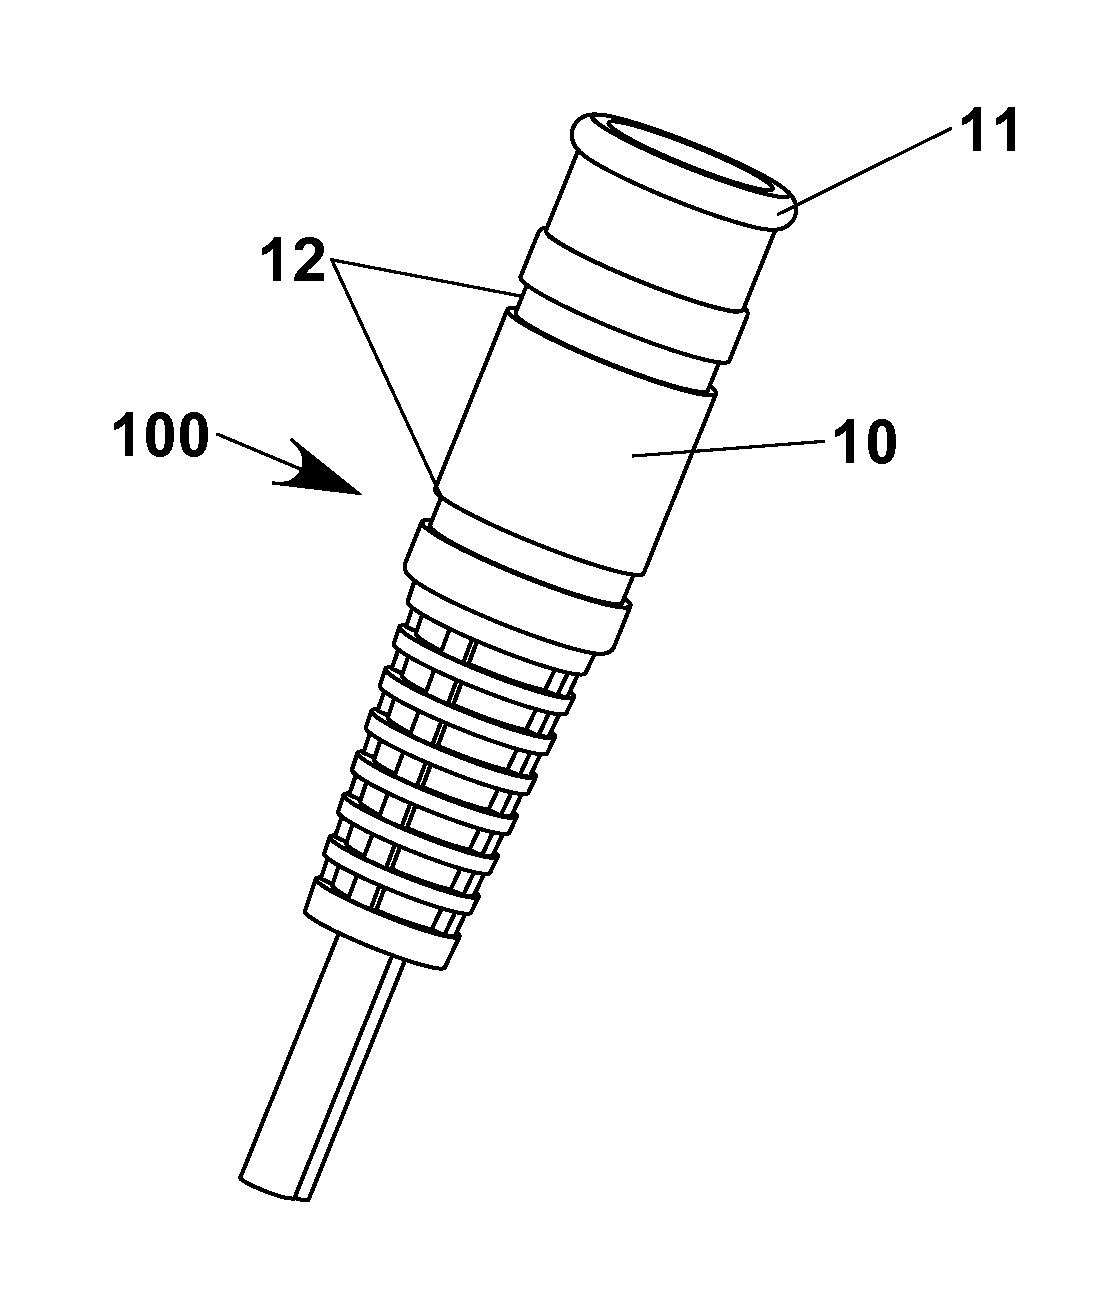 Environmental protective covering for electrical power connectors